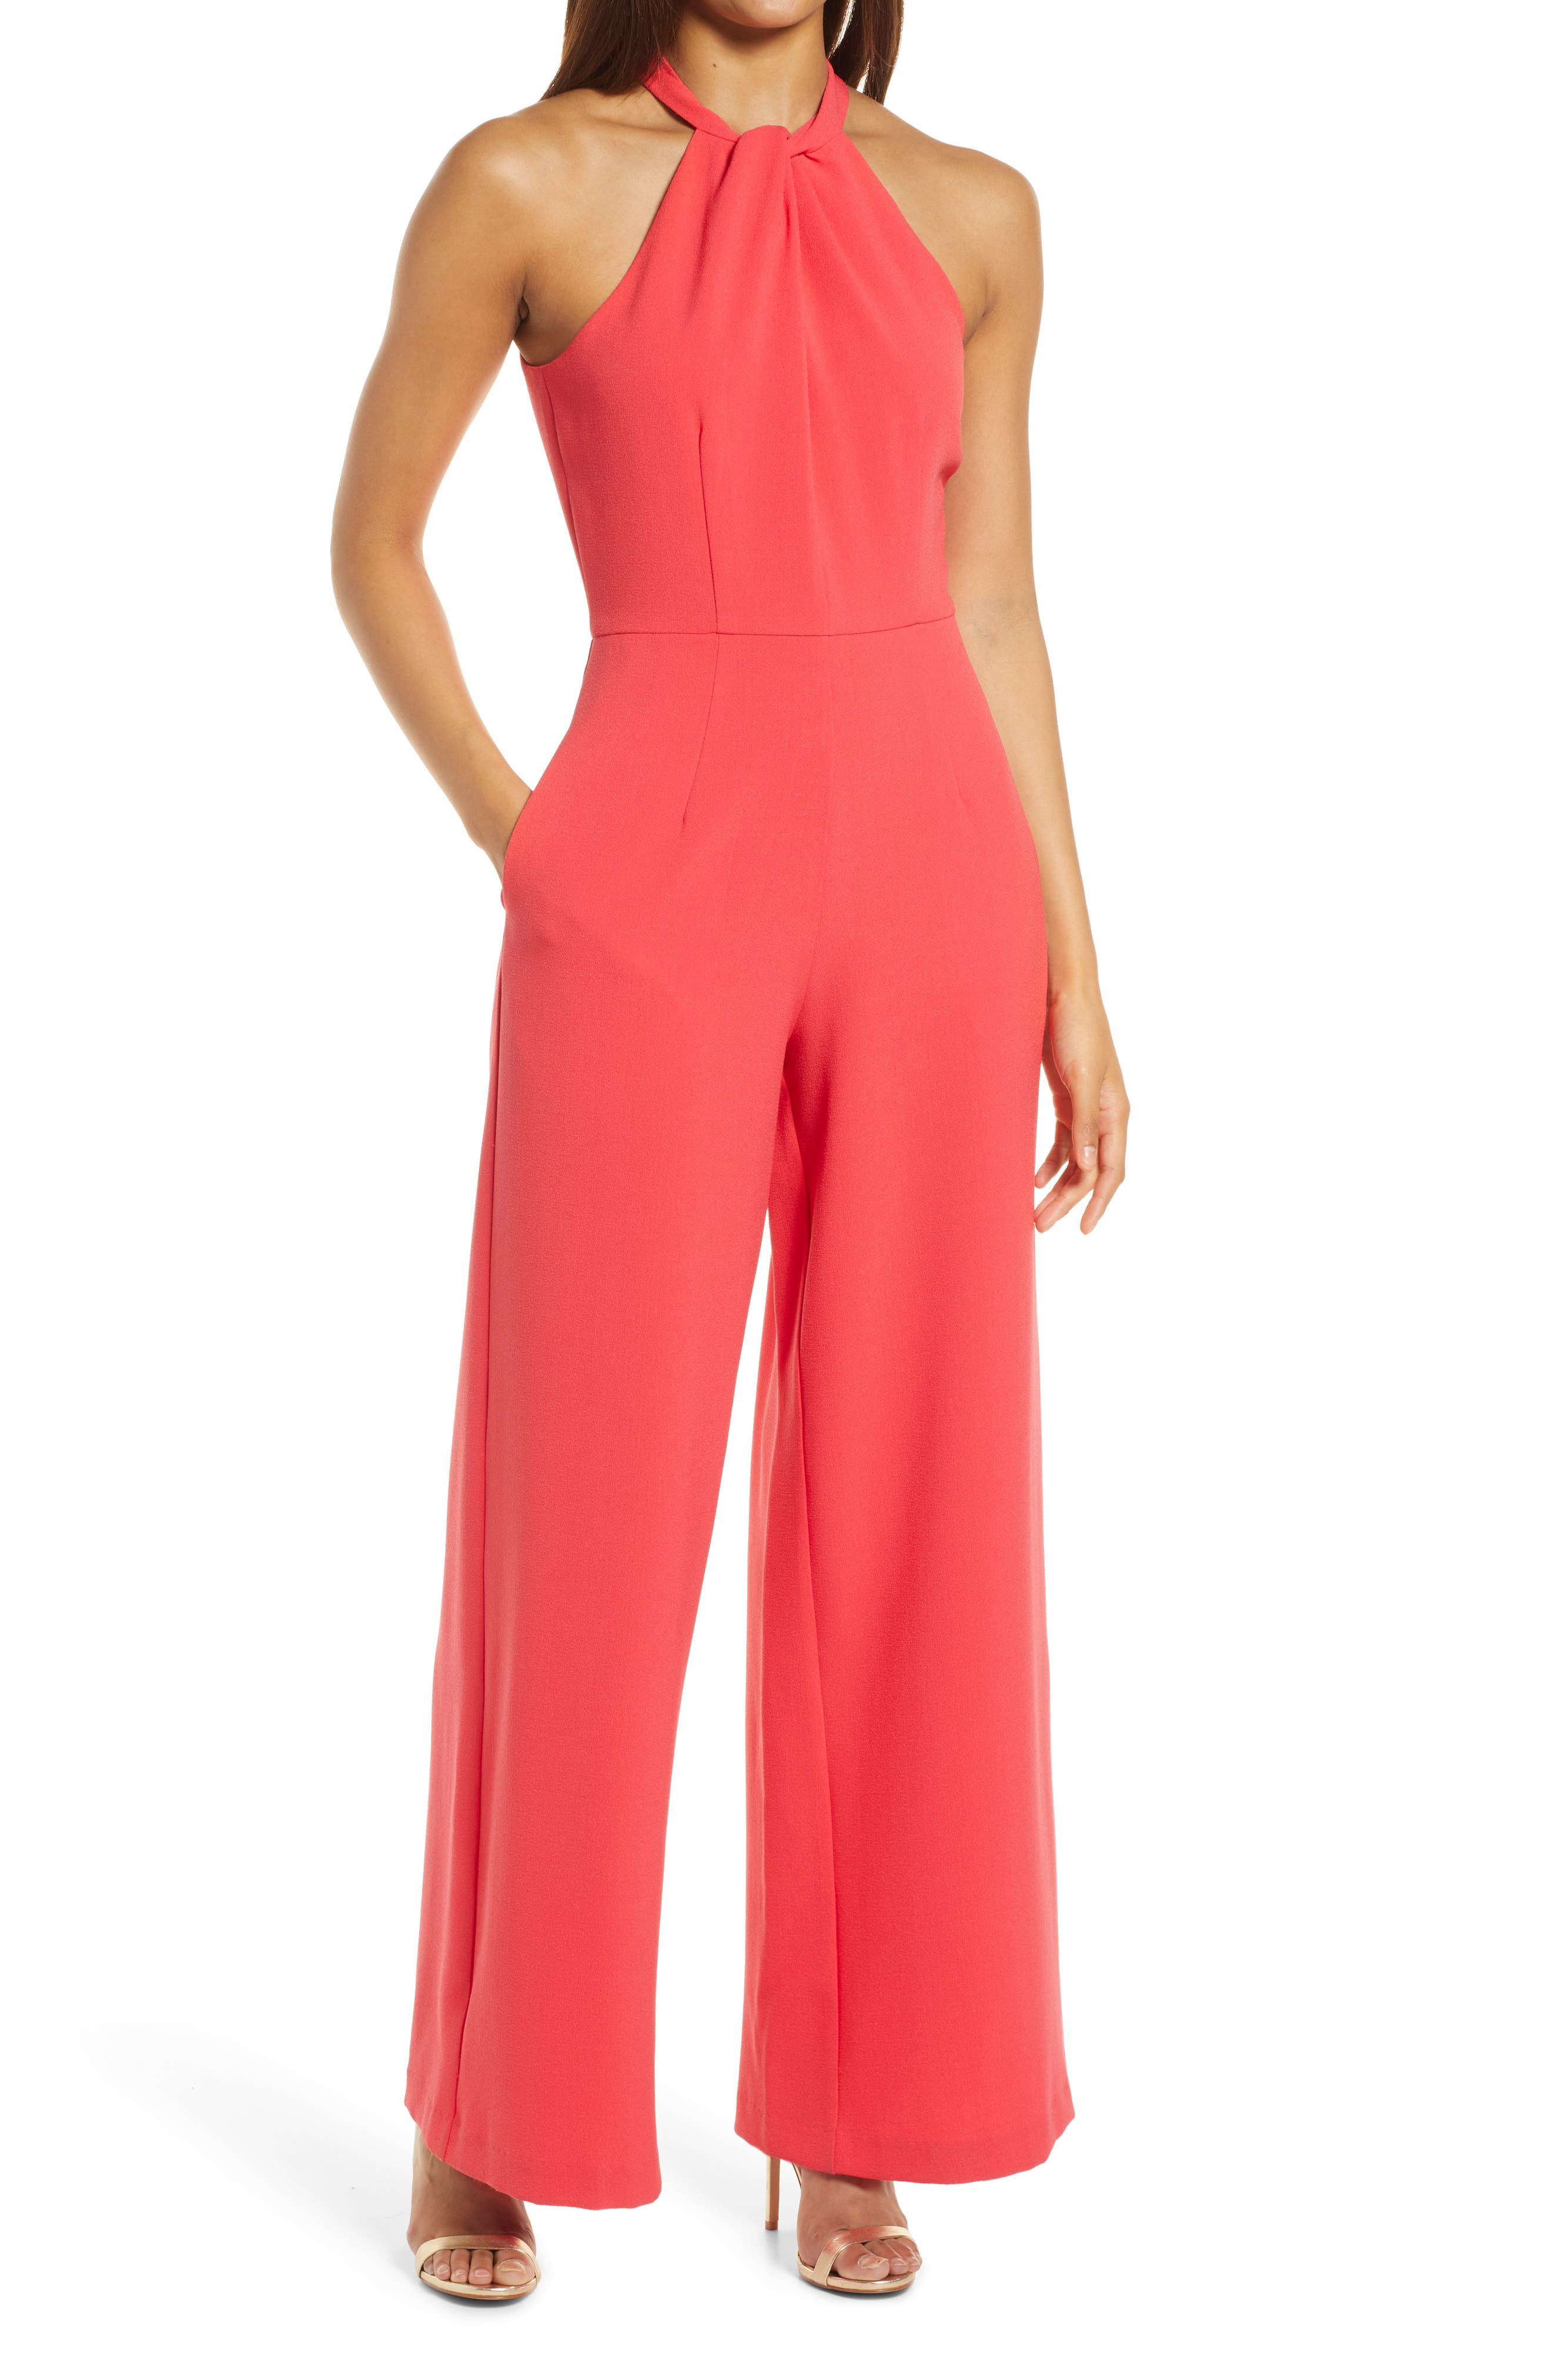 ASOS Synthetic Smock Jumpsuit Womens Clothing Jumpsuits and rompers Full-length jumpsuits and rompers 